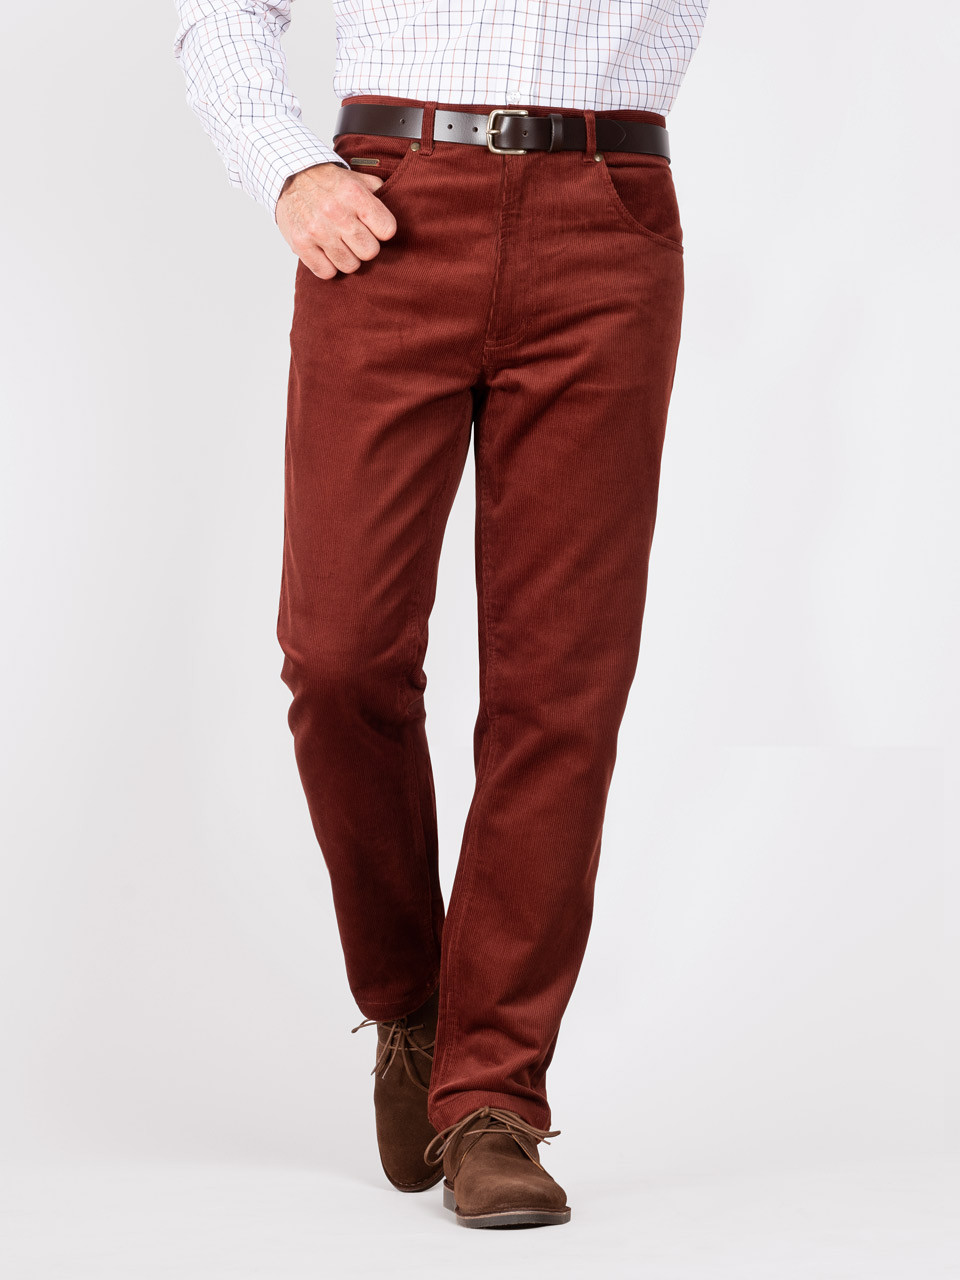 Men's Red Brown Needle Cord Jeans